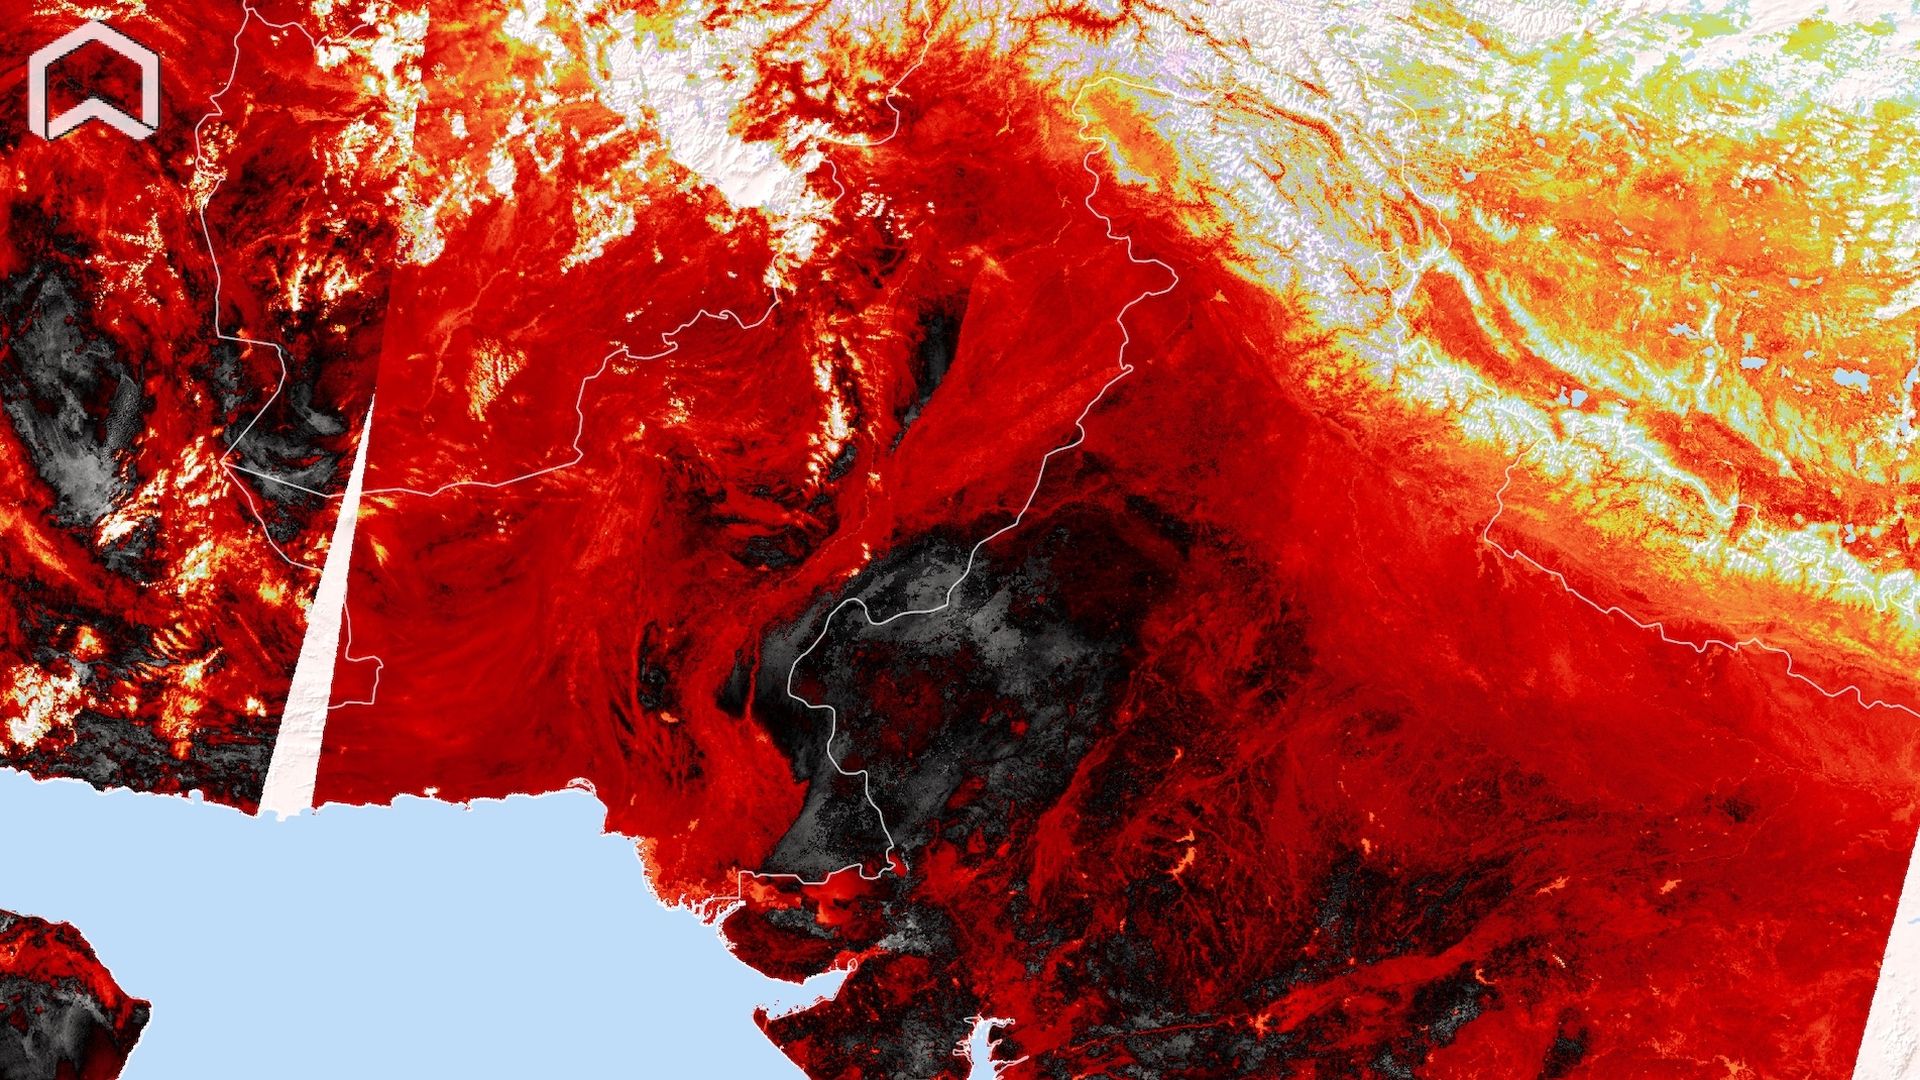 Satellite image showing land surface temperatures on April 28 across India and Pakistan